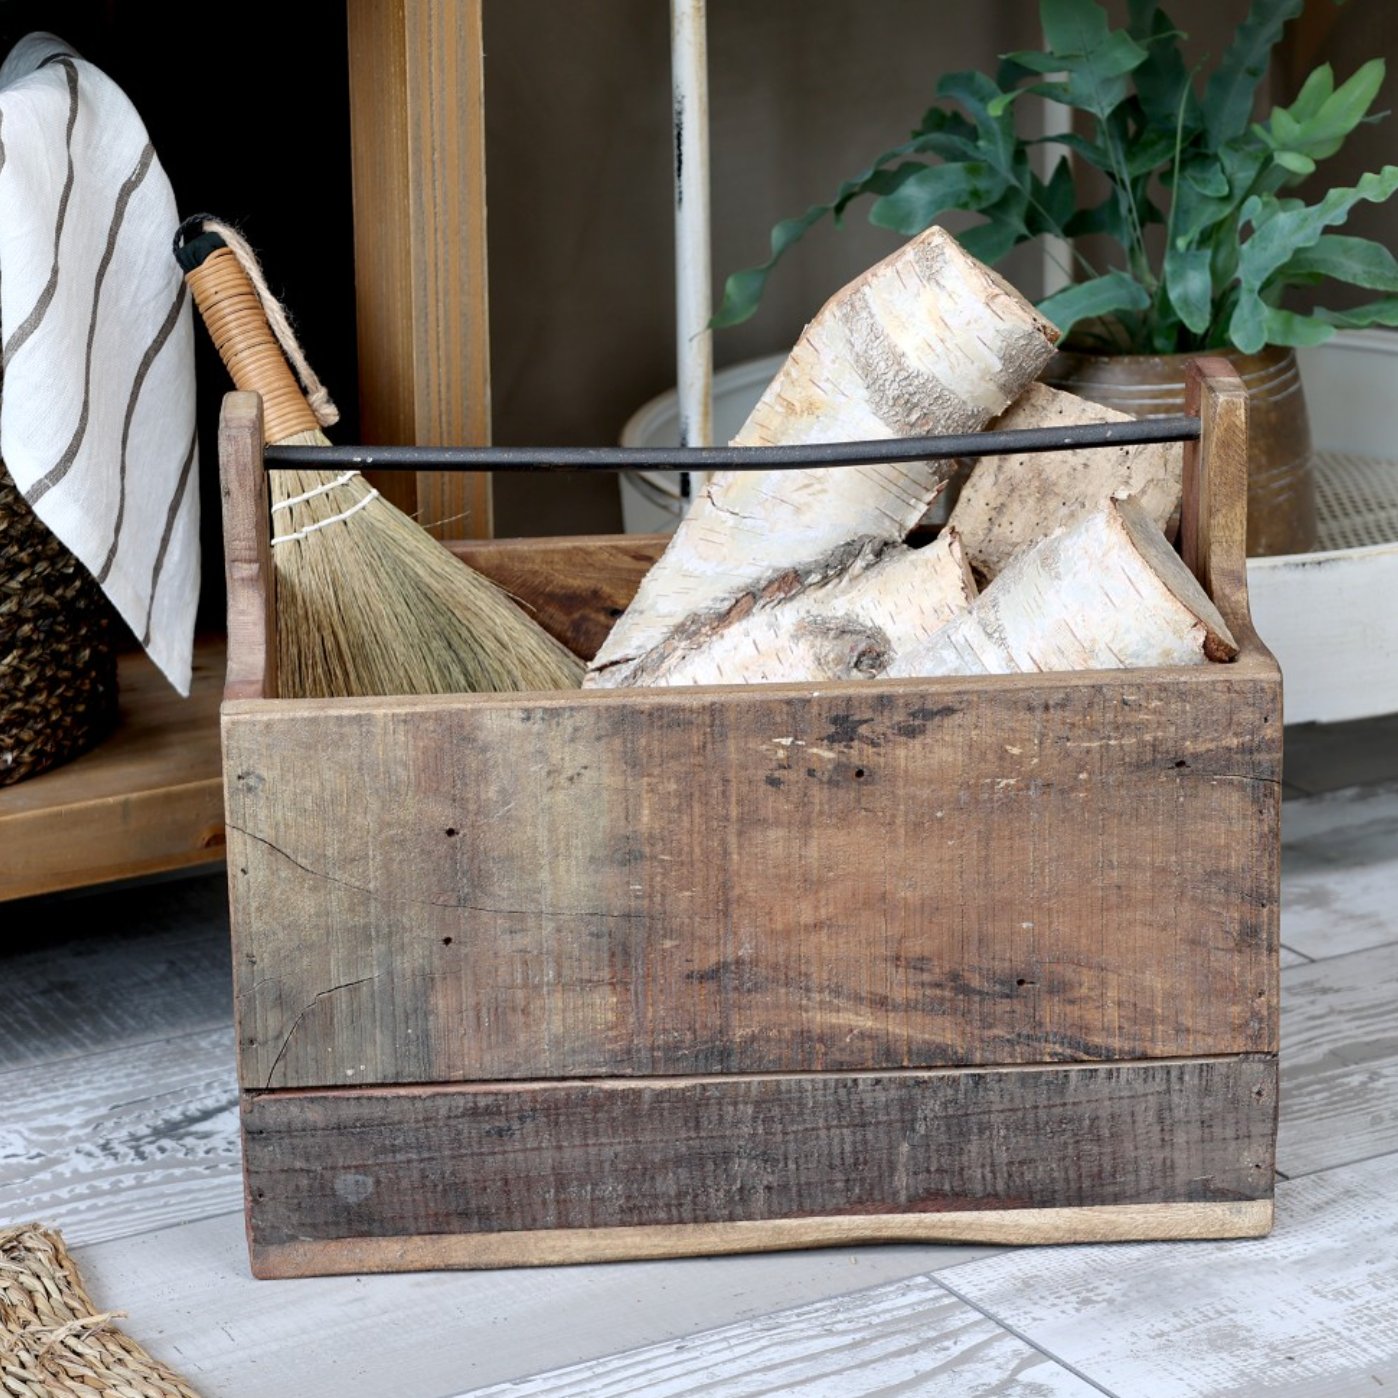 Reclaimed wooden storage box with logs and a brush.